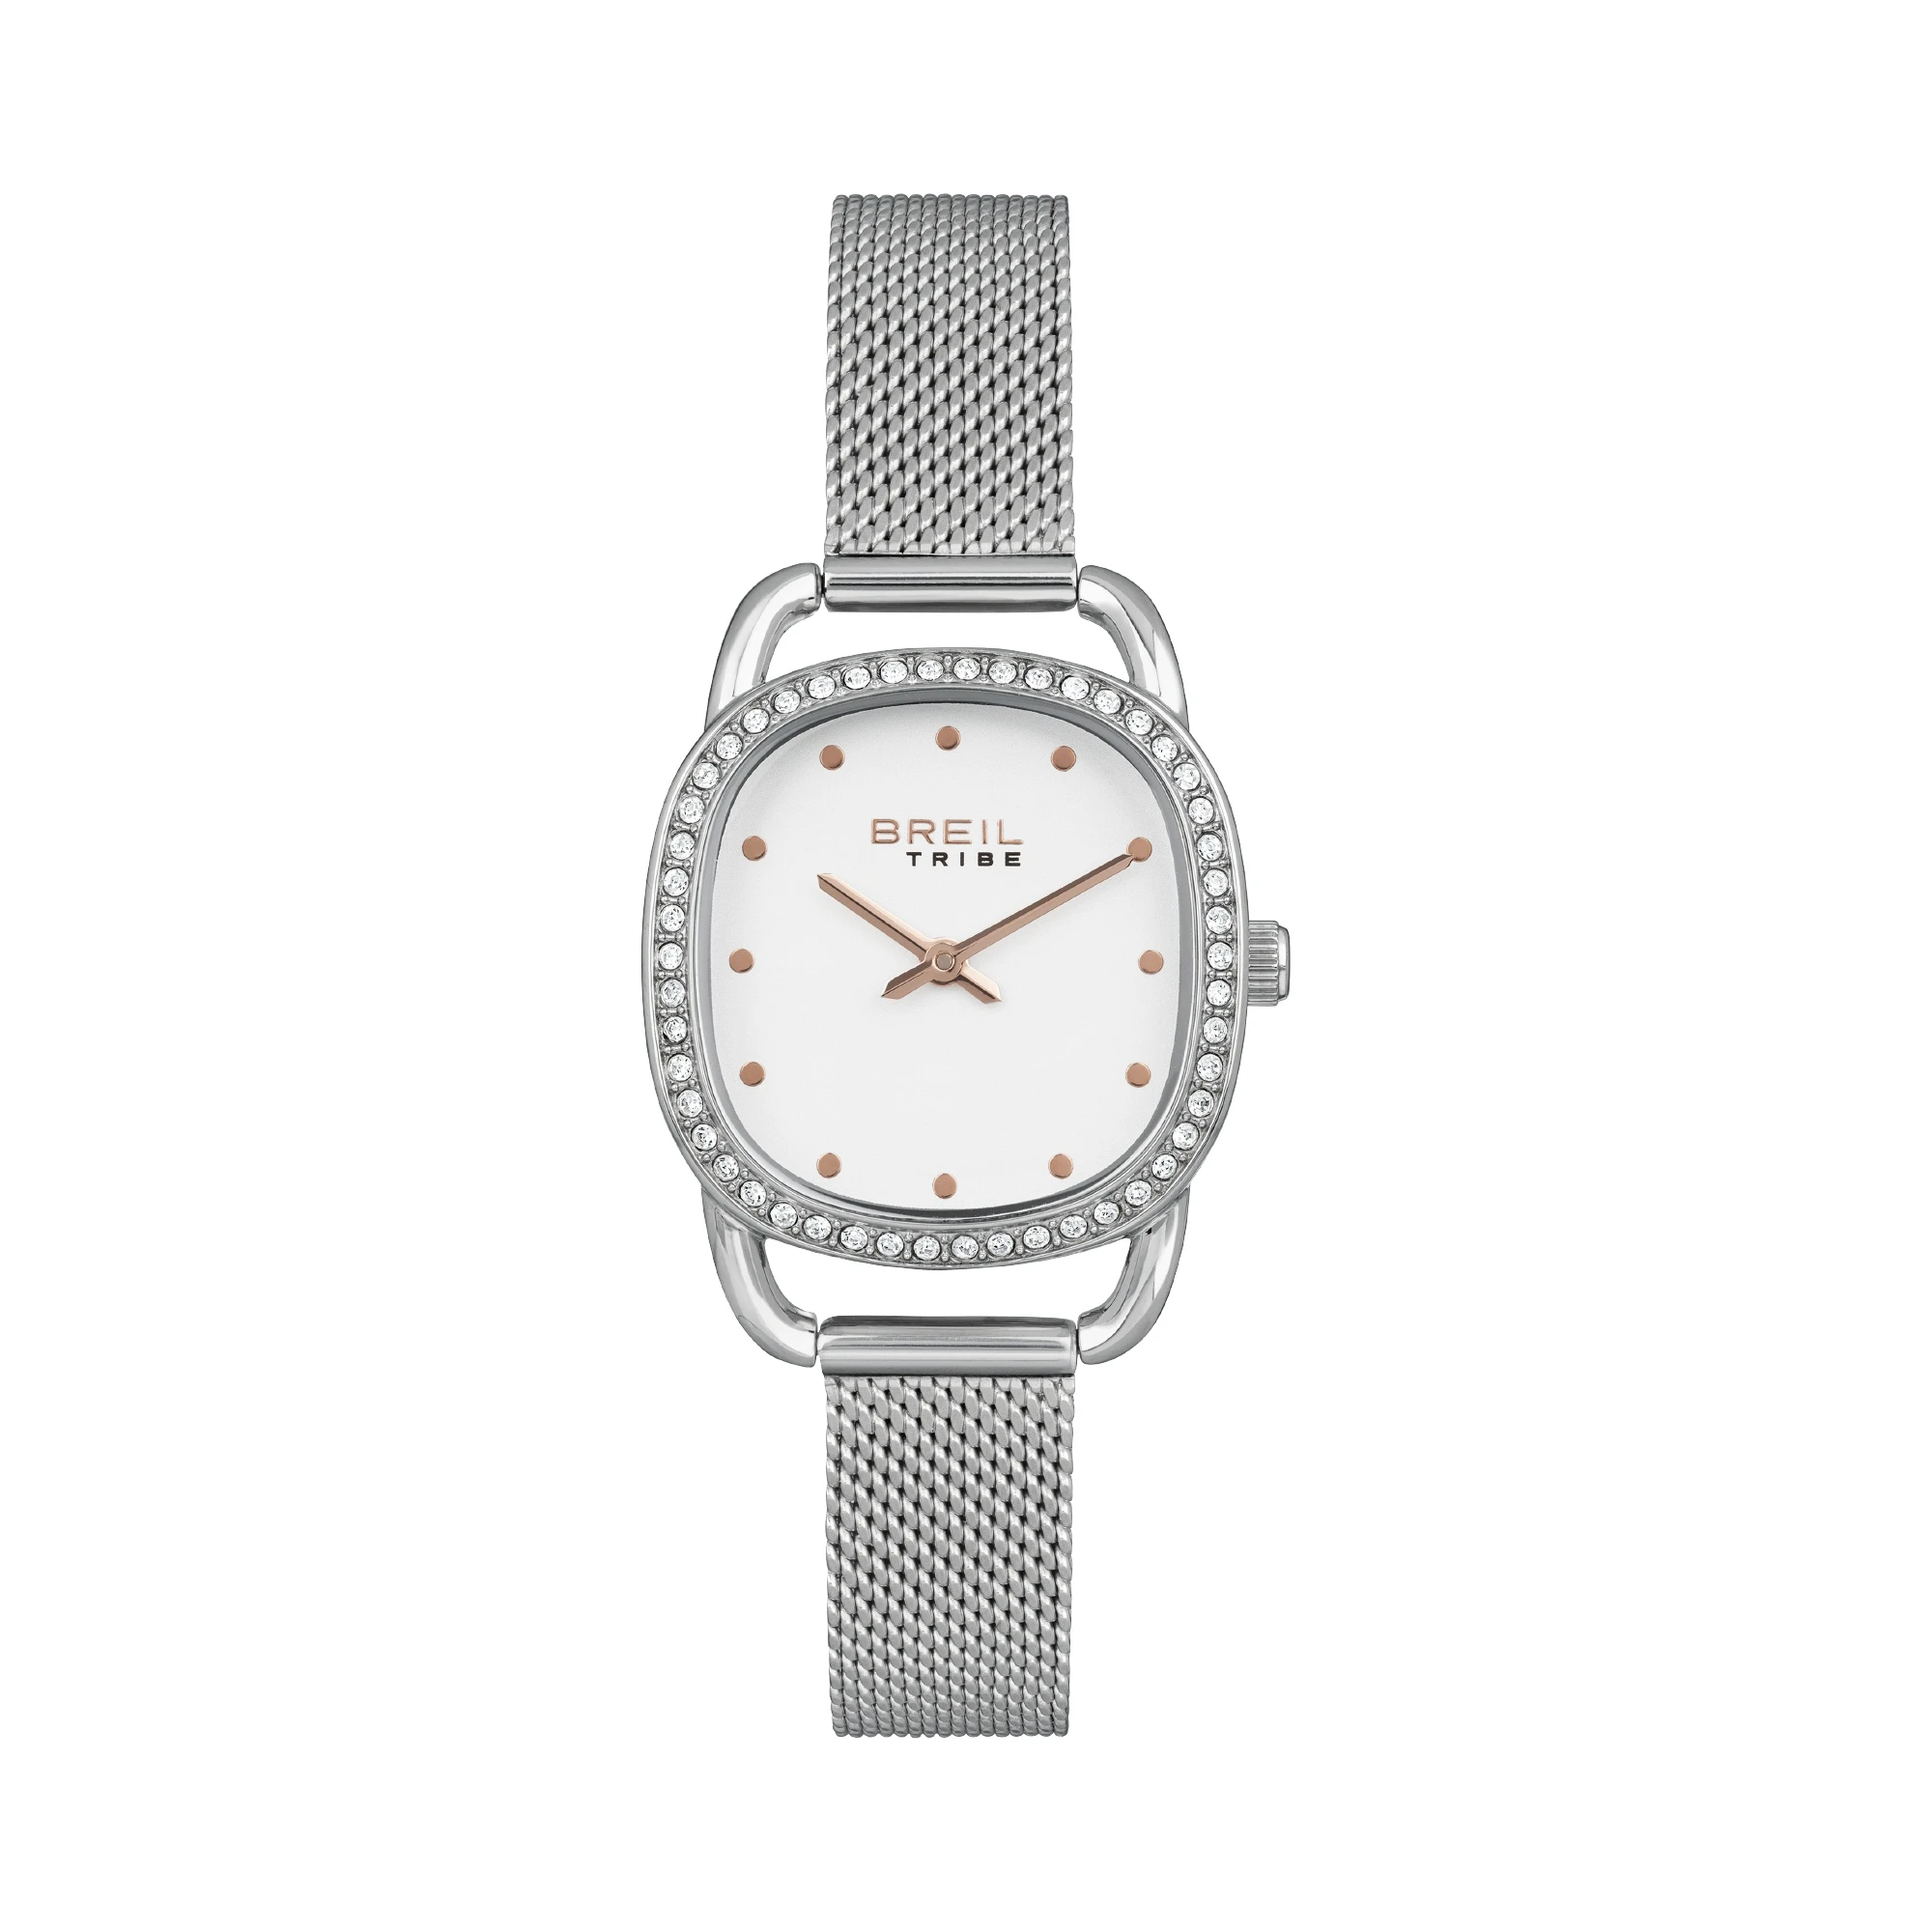 PENELOPE - TIME ONLY LADY 28X28 MM - 1 - EW0491 | Breil